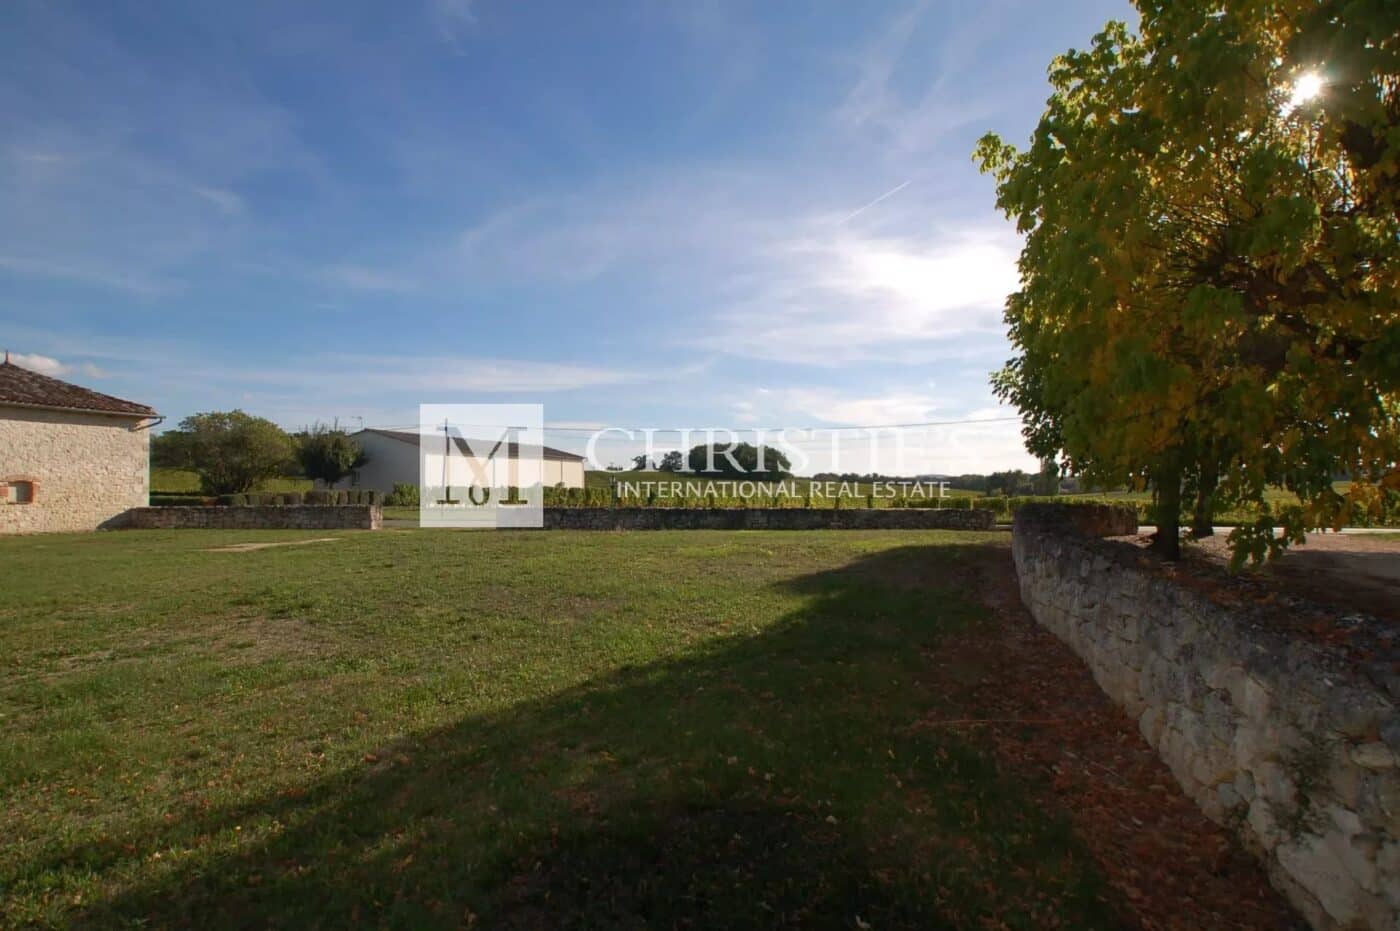 Bergerac - Superb, well-kept property with over 60 ha  of organically grown vines